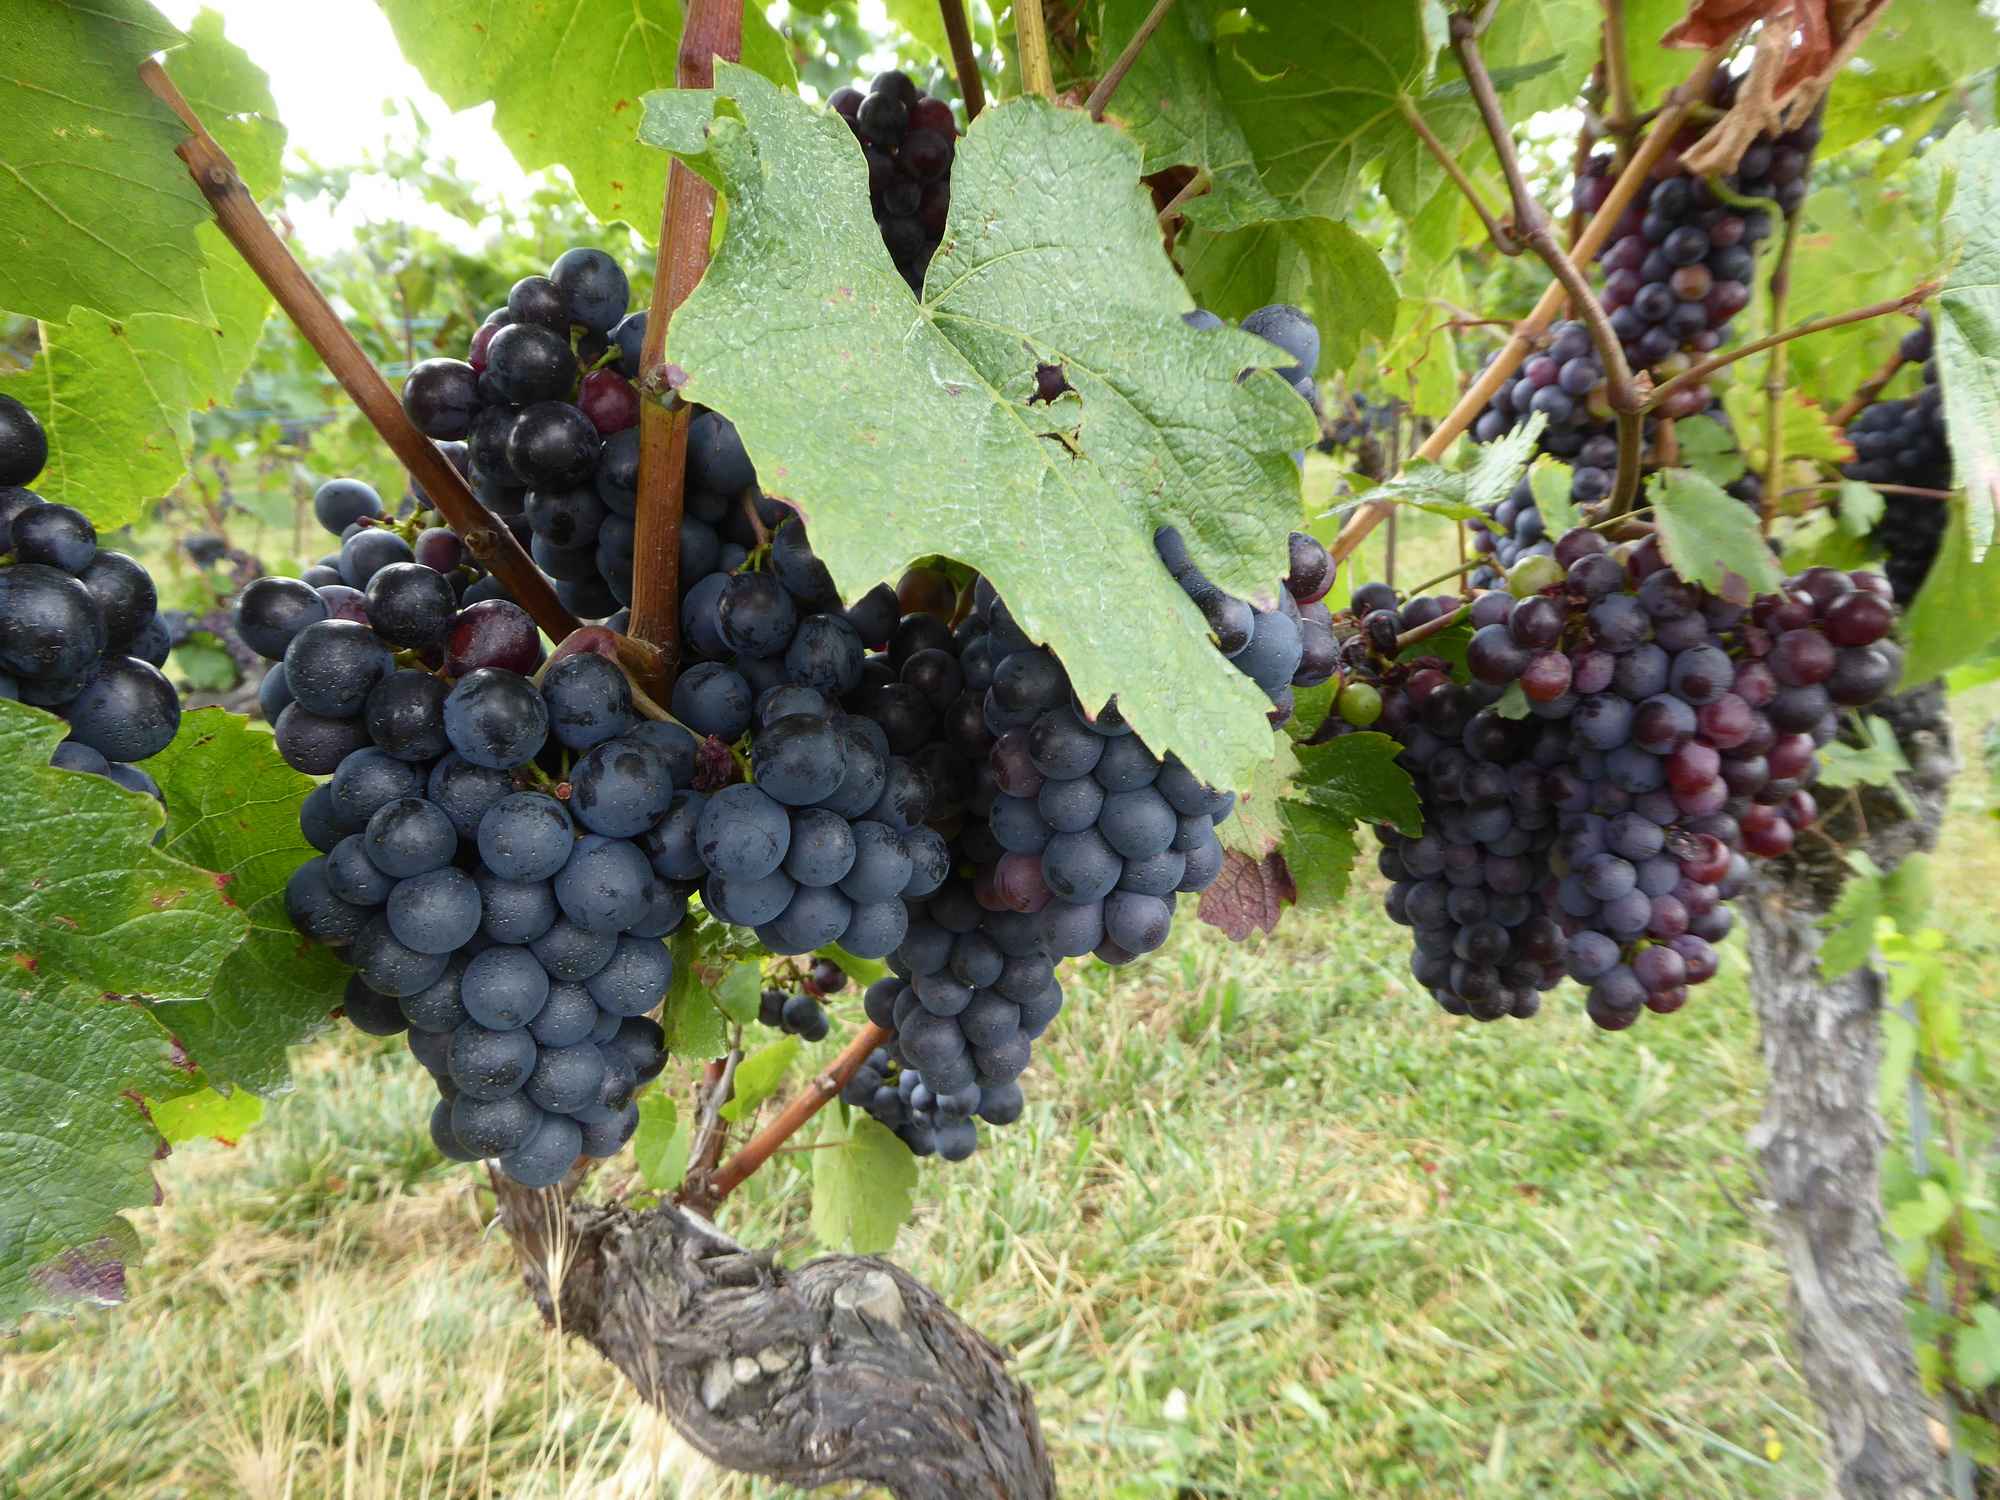 Grapes and vines